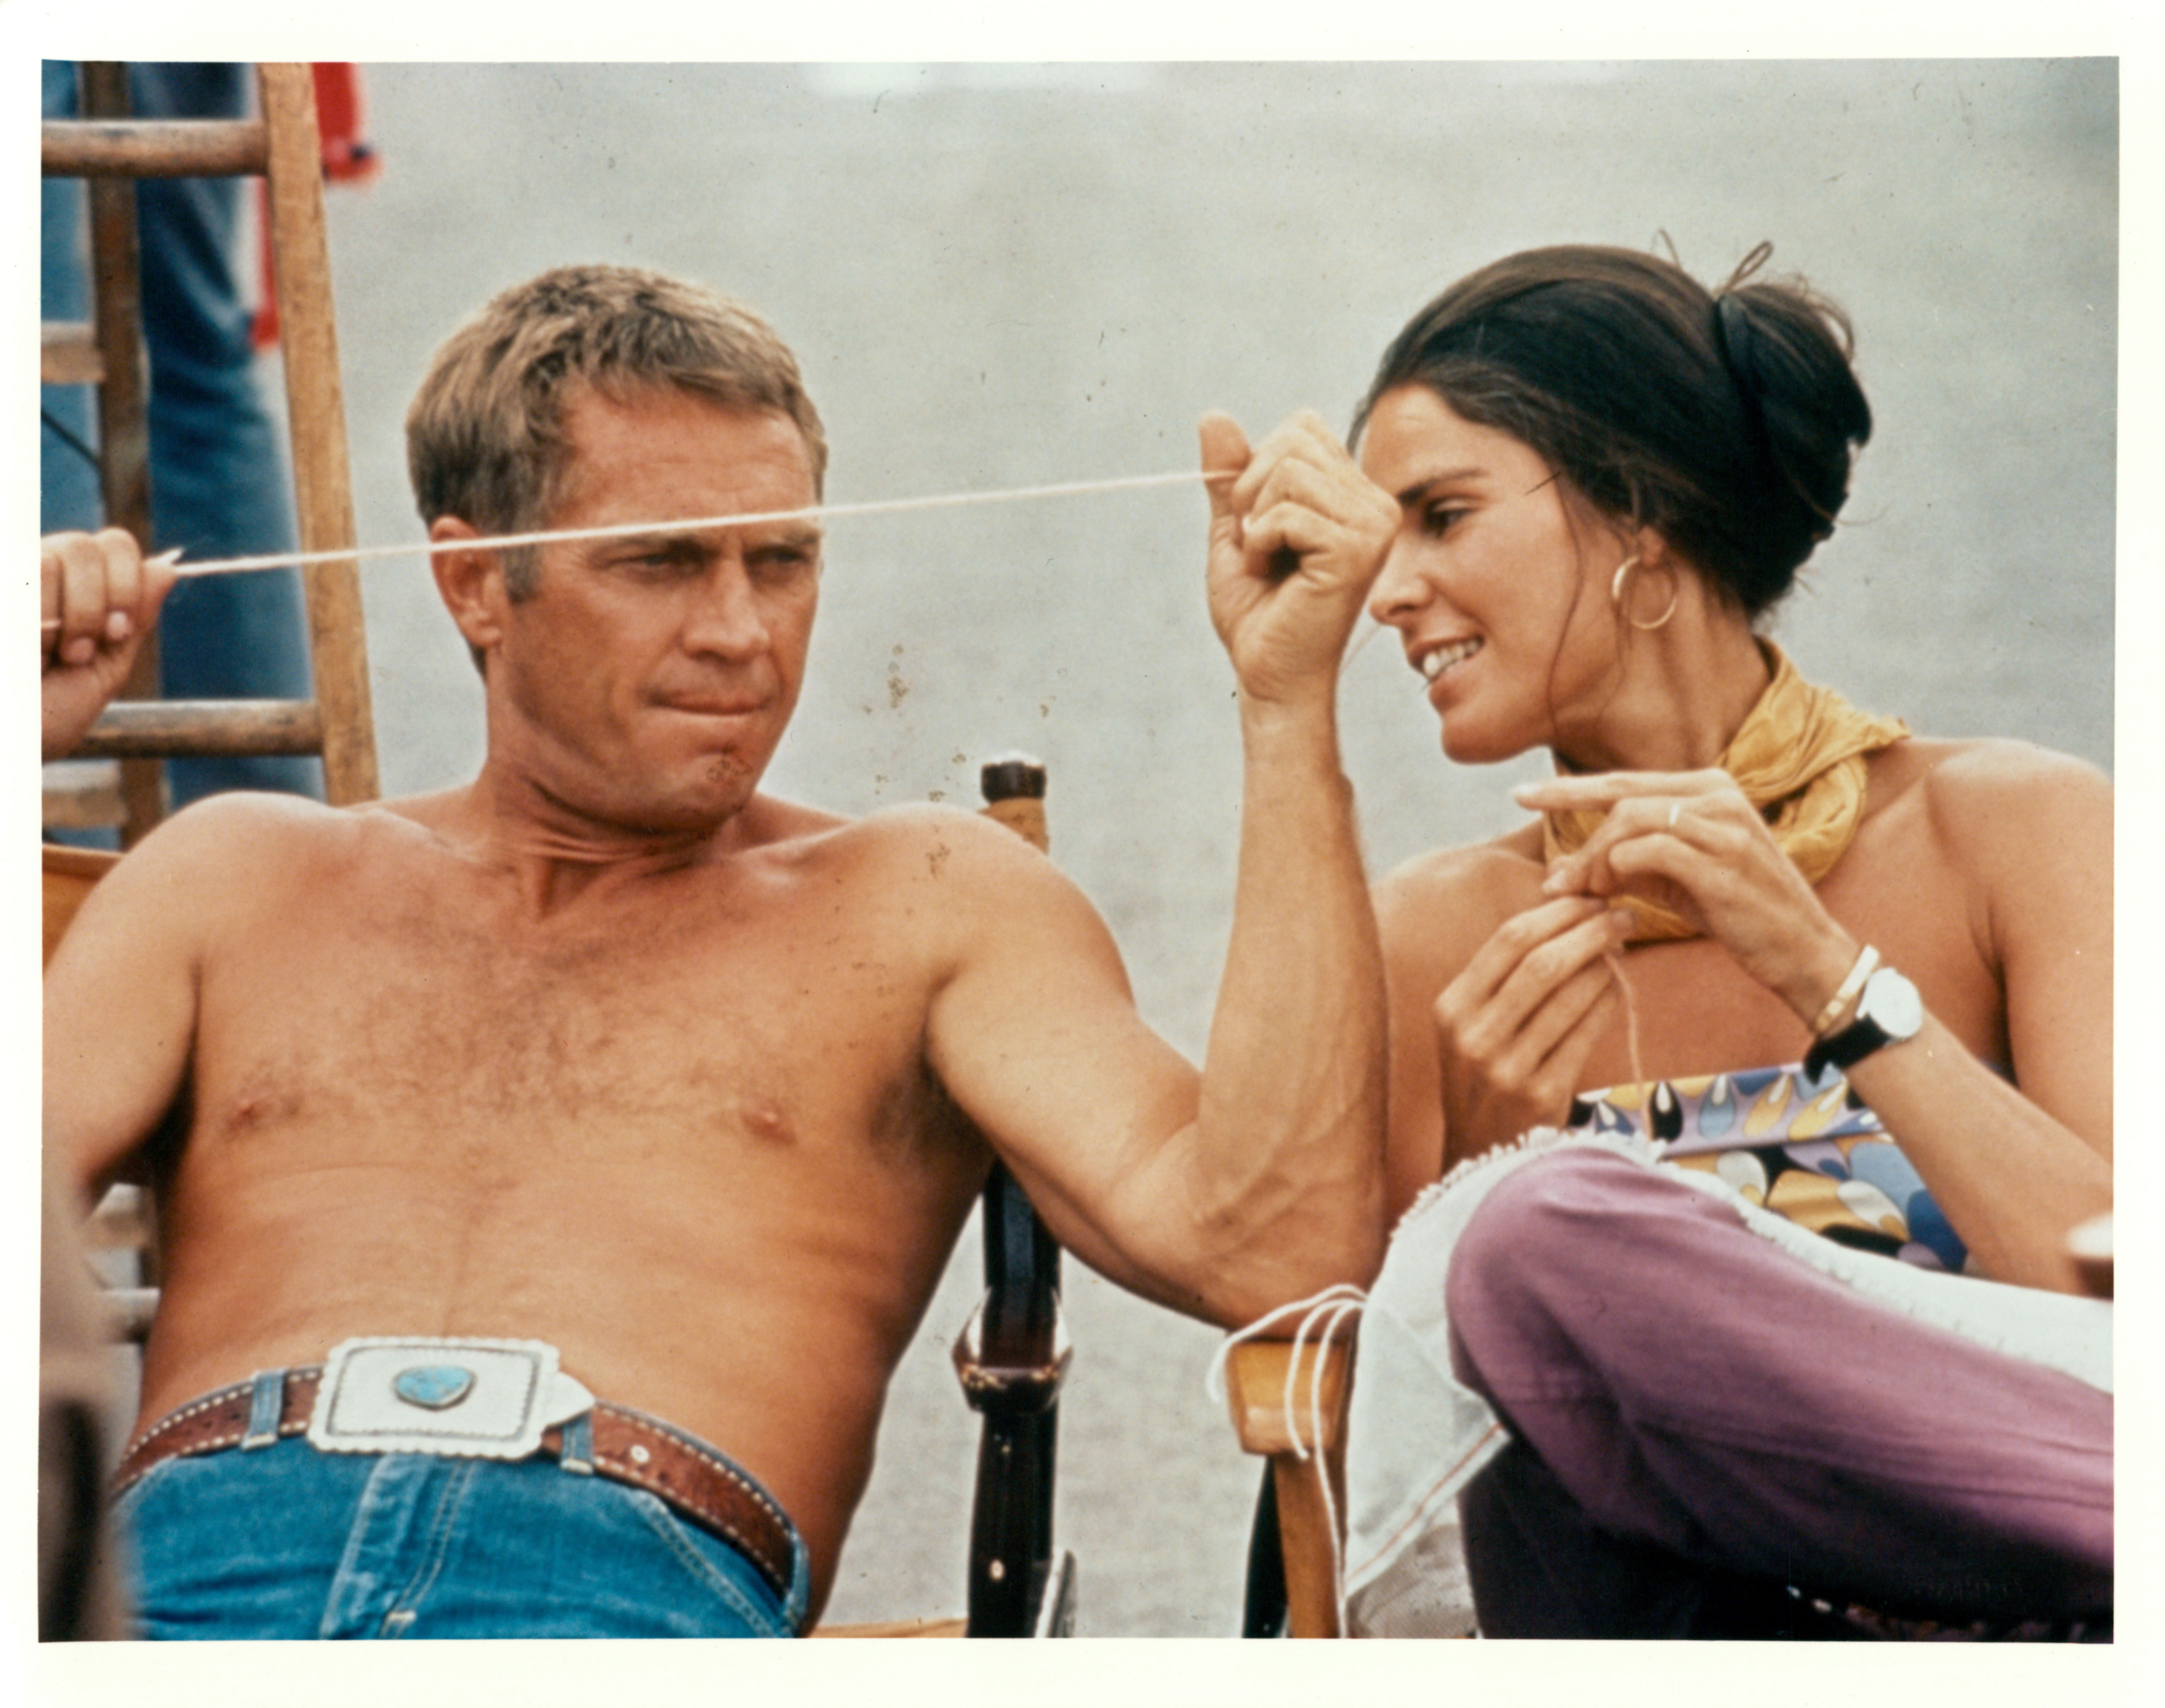 Steve McQueen and Ali MacGraw on the set of "The Getaway" in 1972 | Source: Getty Images